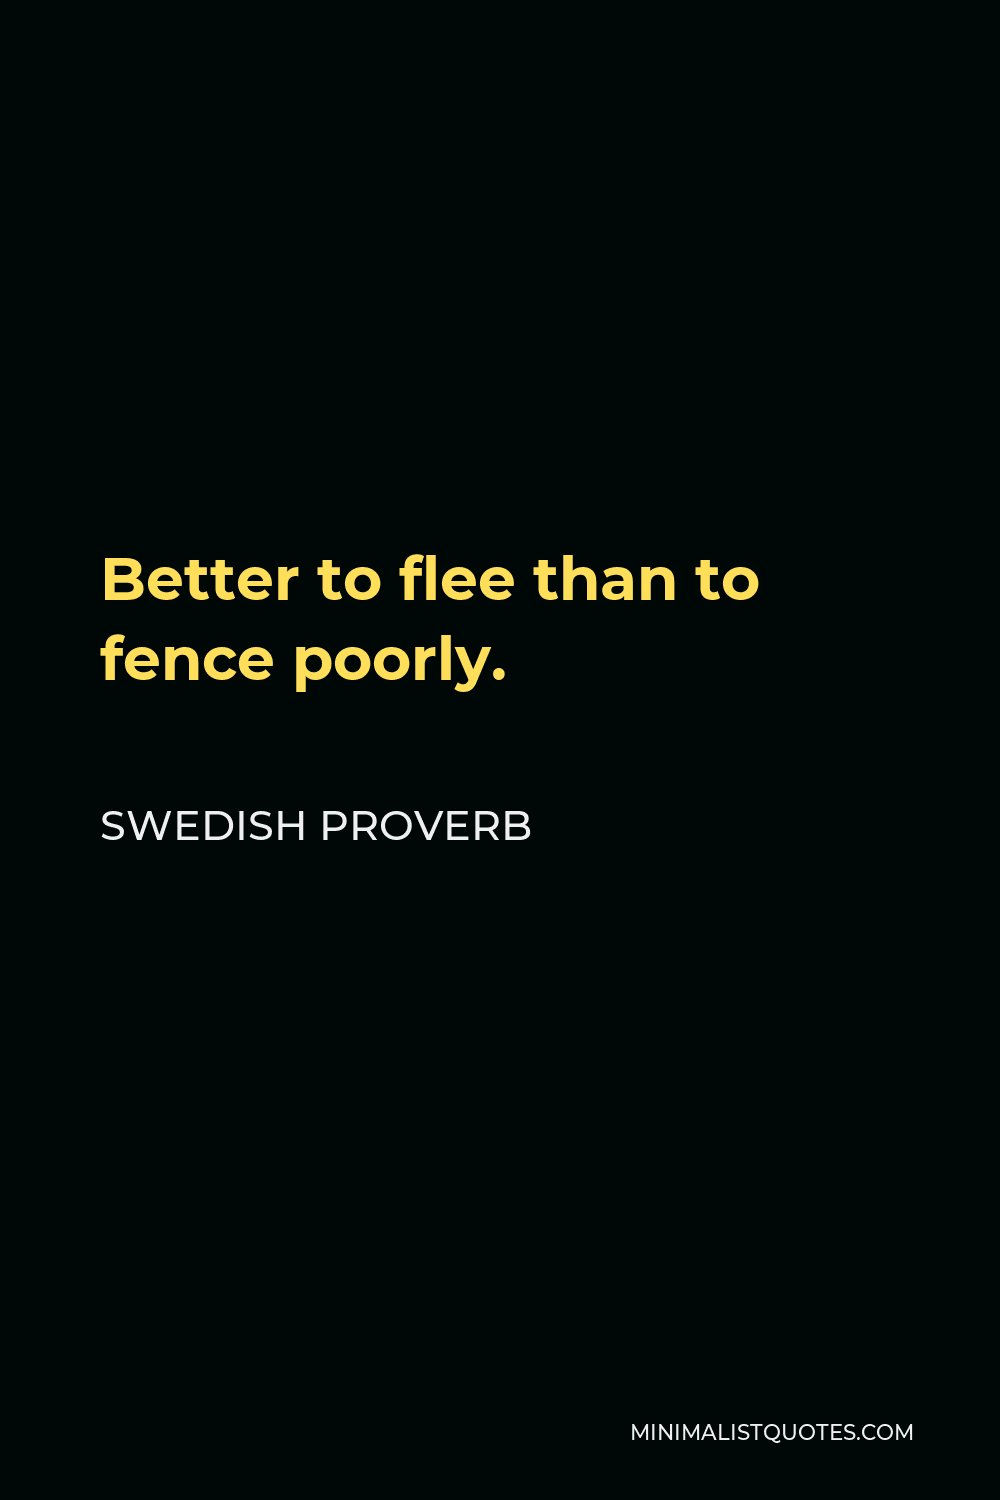 Swedish Proverb Quote - Better to flee than to fence poorly.